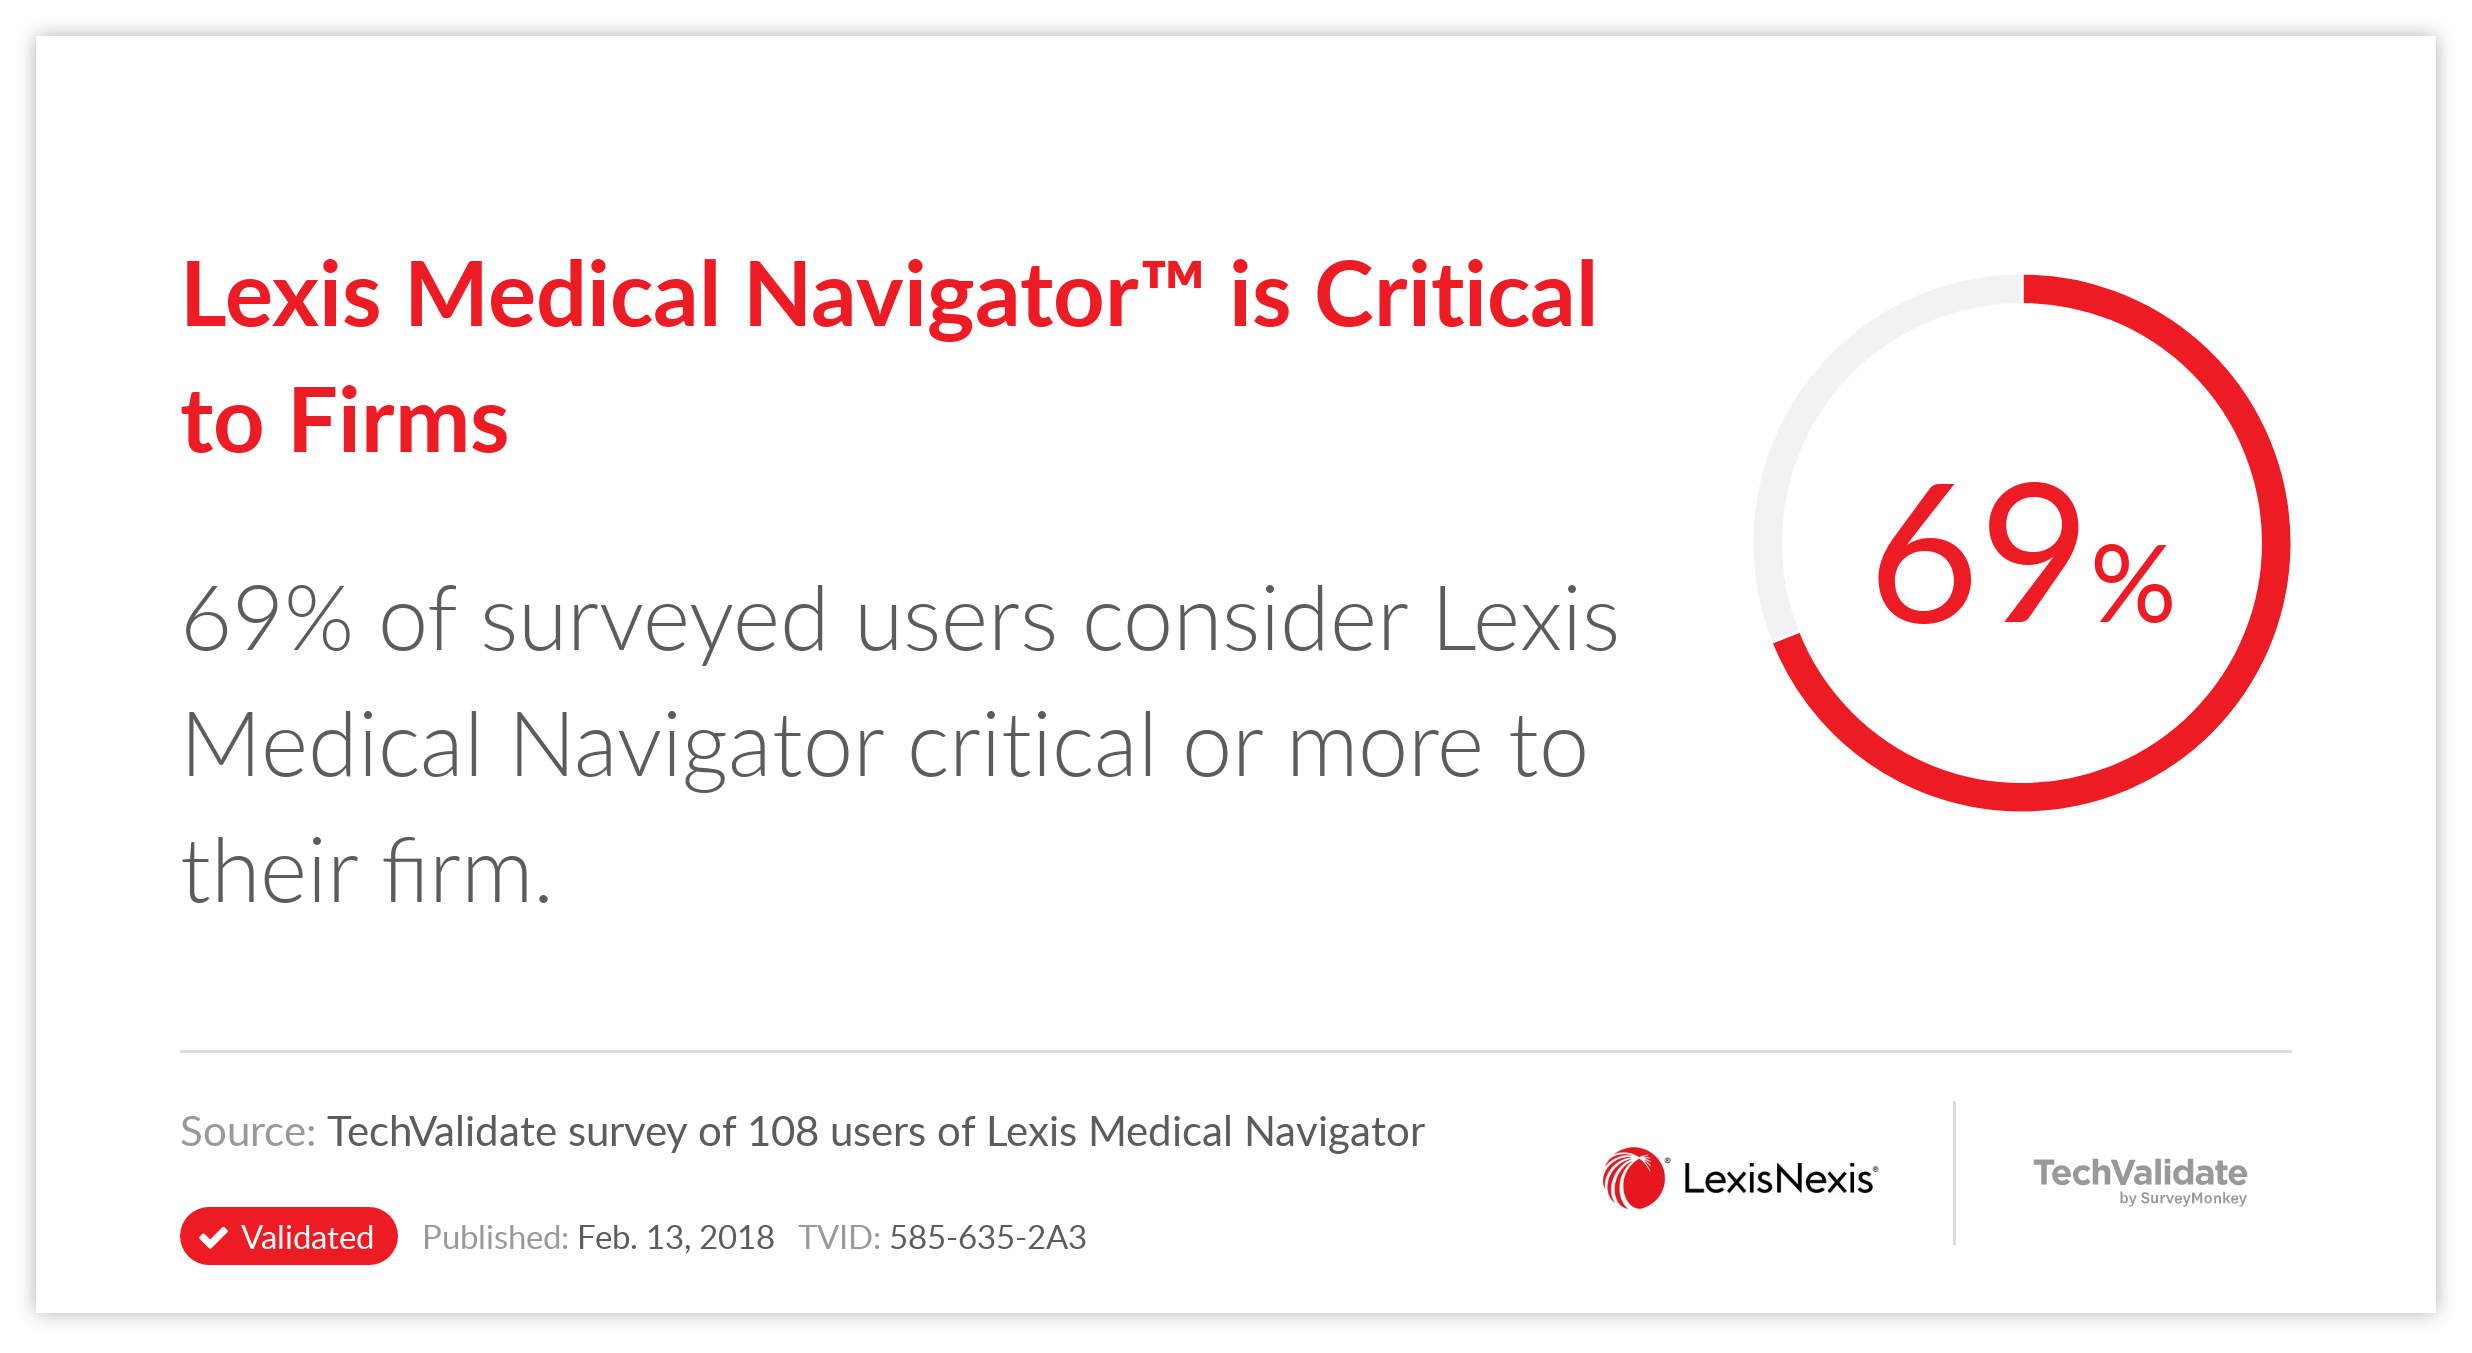 Lexis Medical Navigator(TM) is Critical to Firms